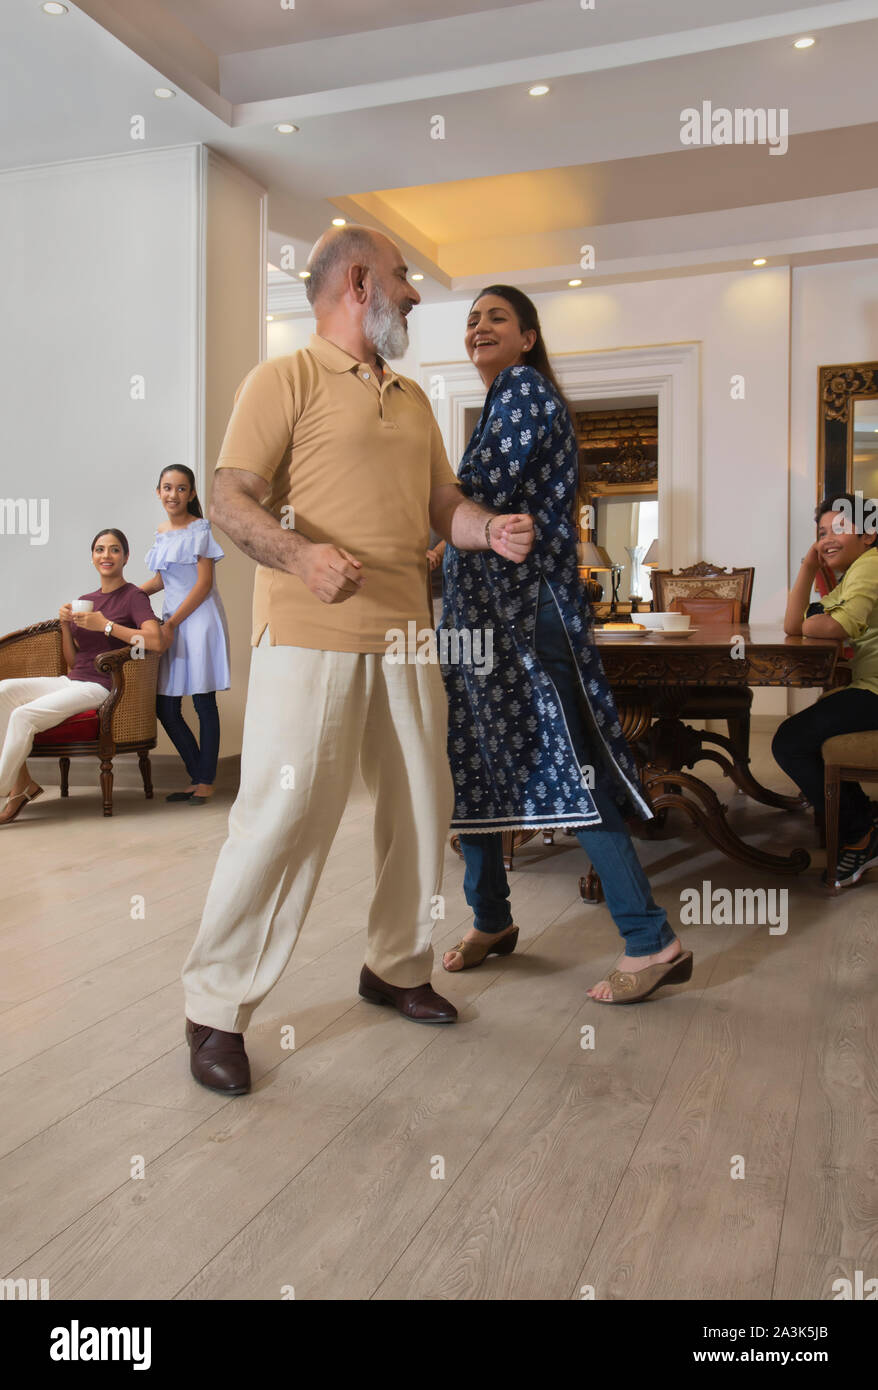 Grandparents dance in the living room in front of the family. Stock Photo